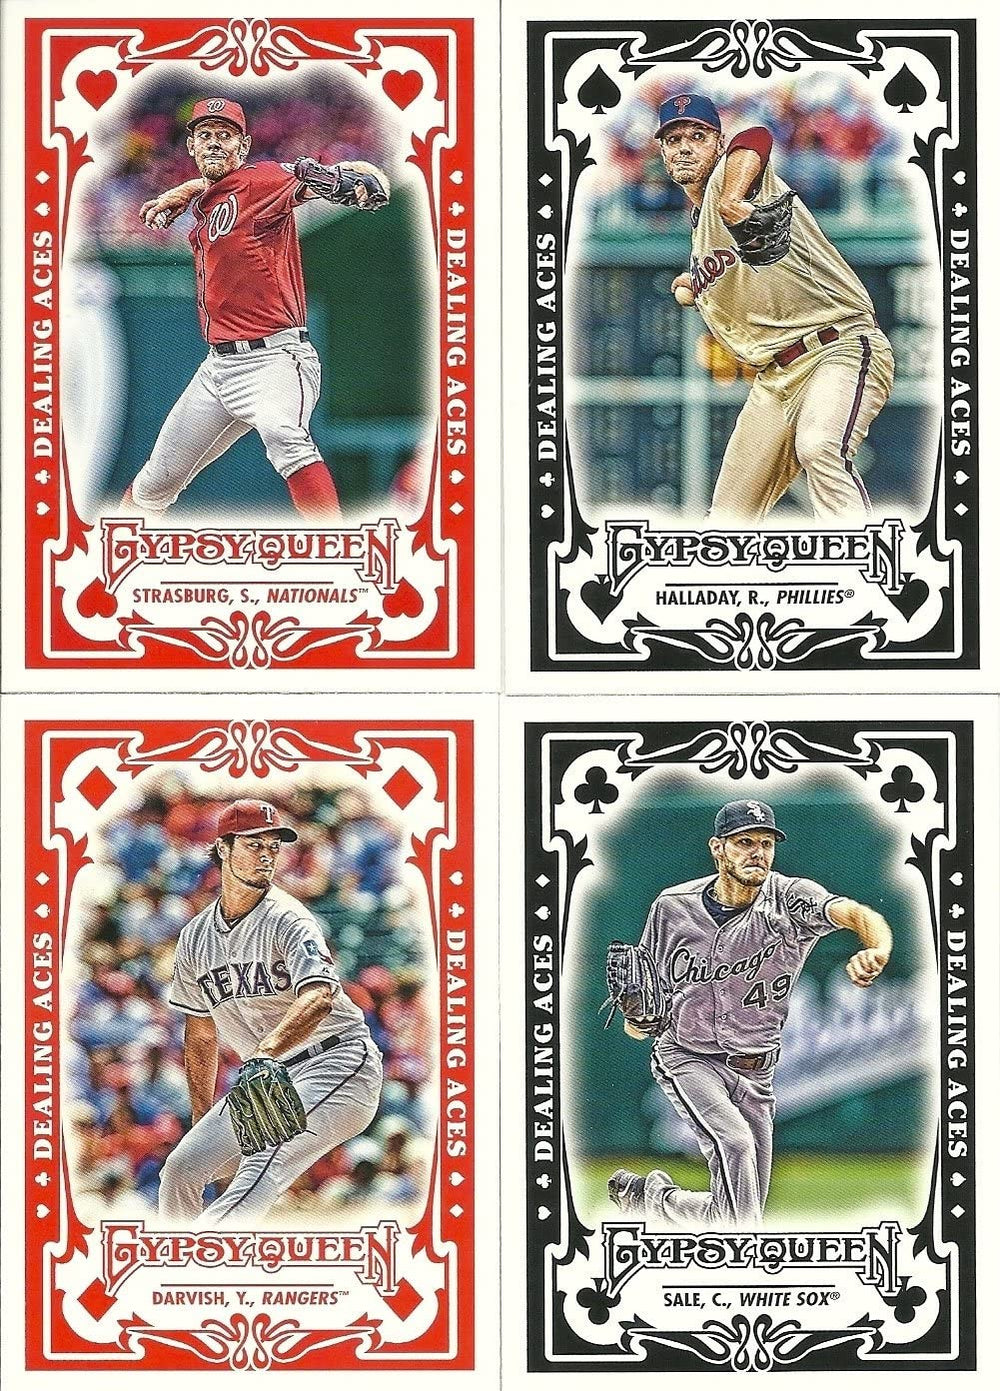 2013 Topps Gypsy Queen DEALING ACES Series 20 Card Insert Set with Clayton Kershaw and Stephen Strasburg Plus